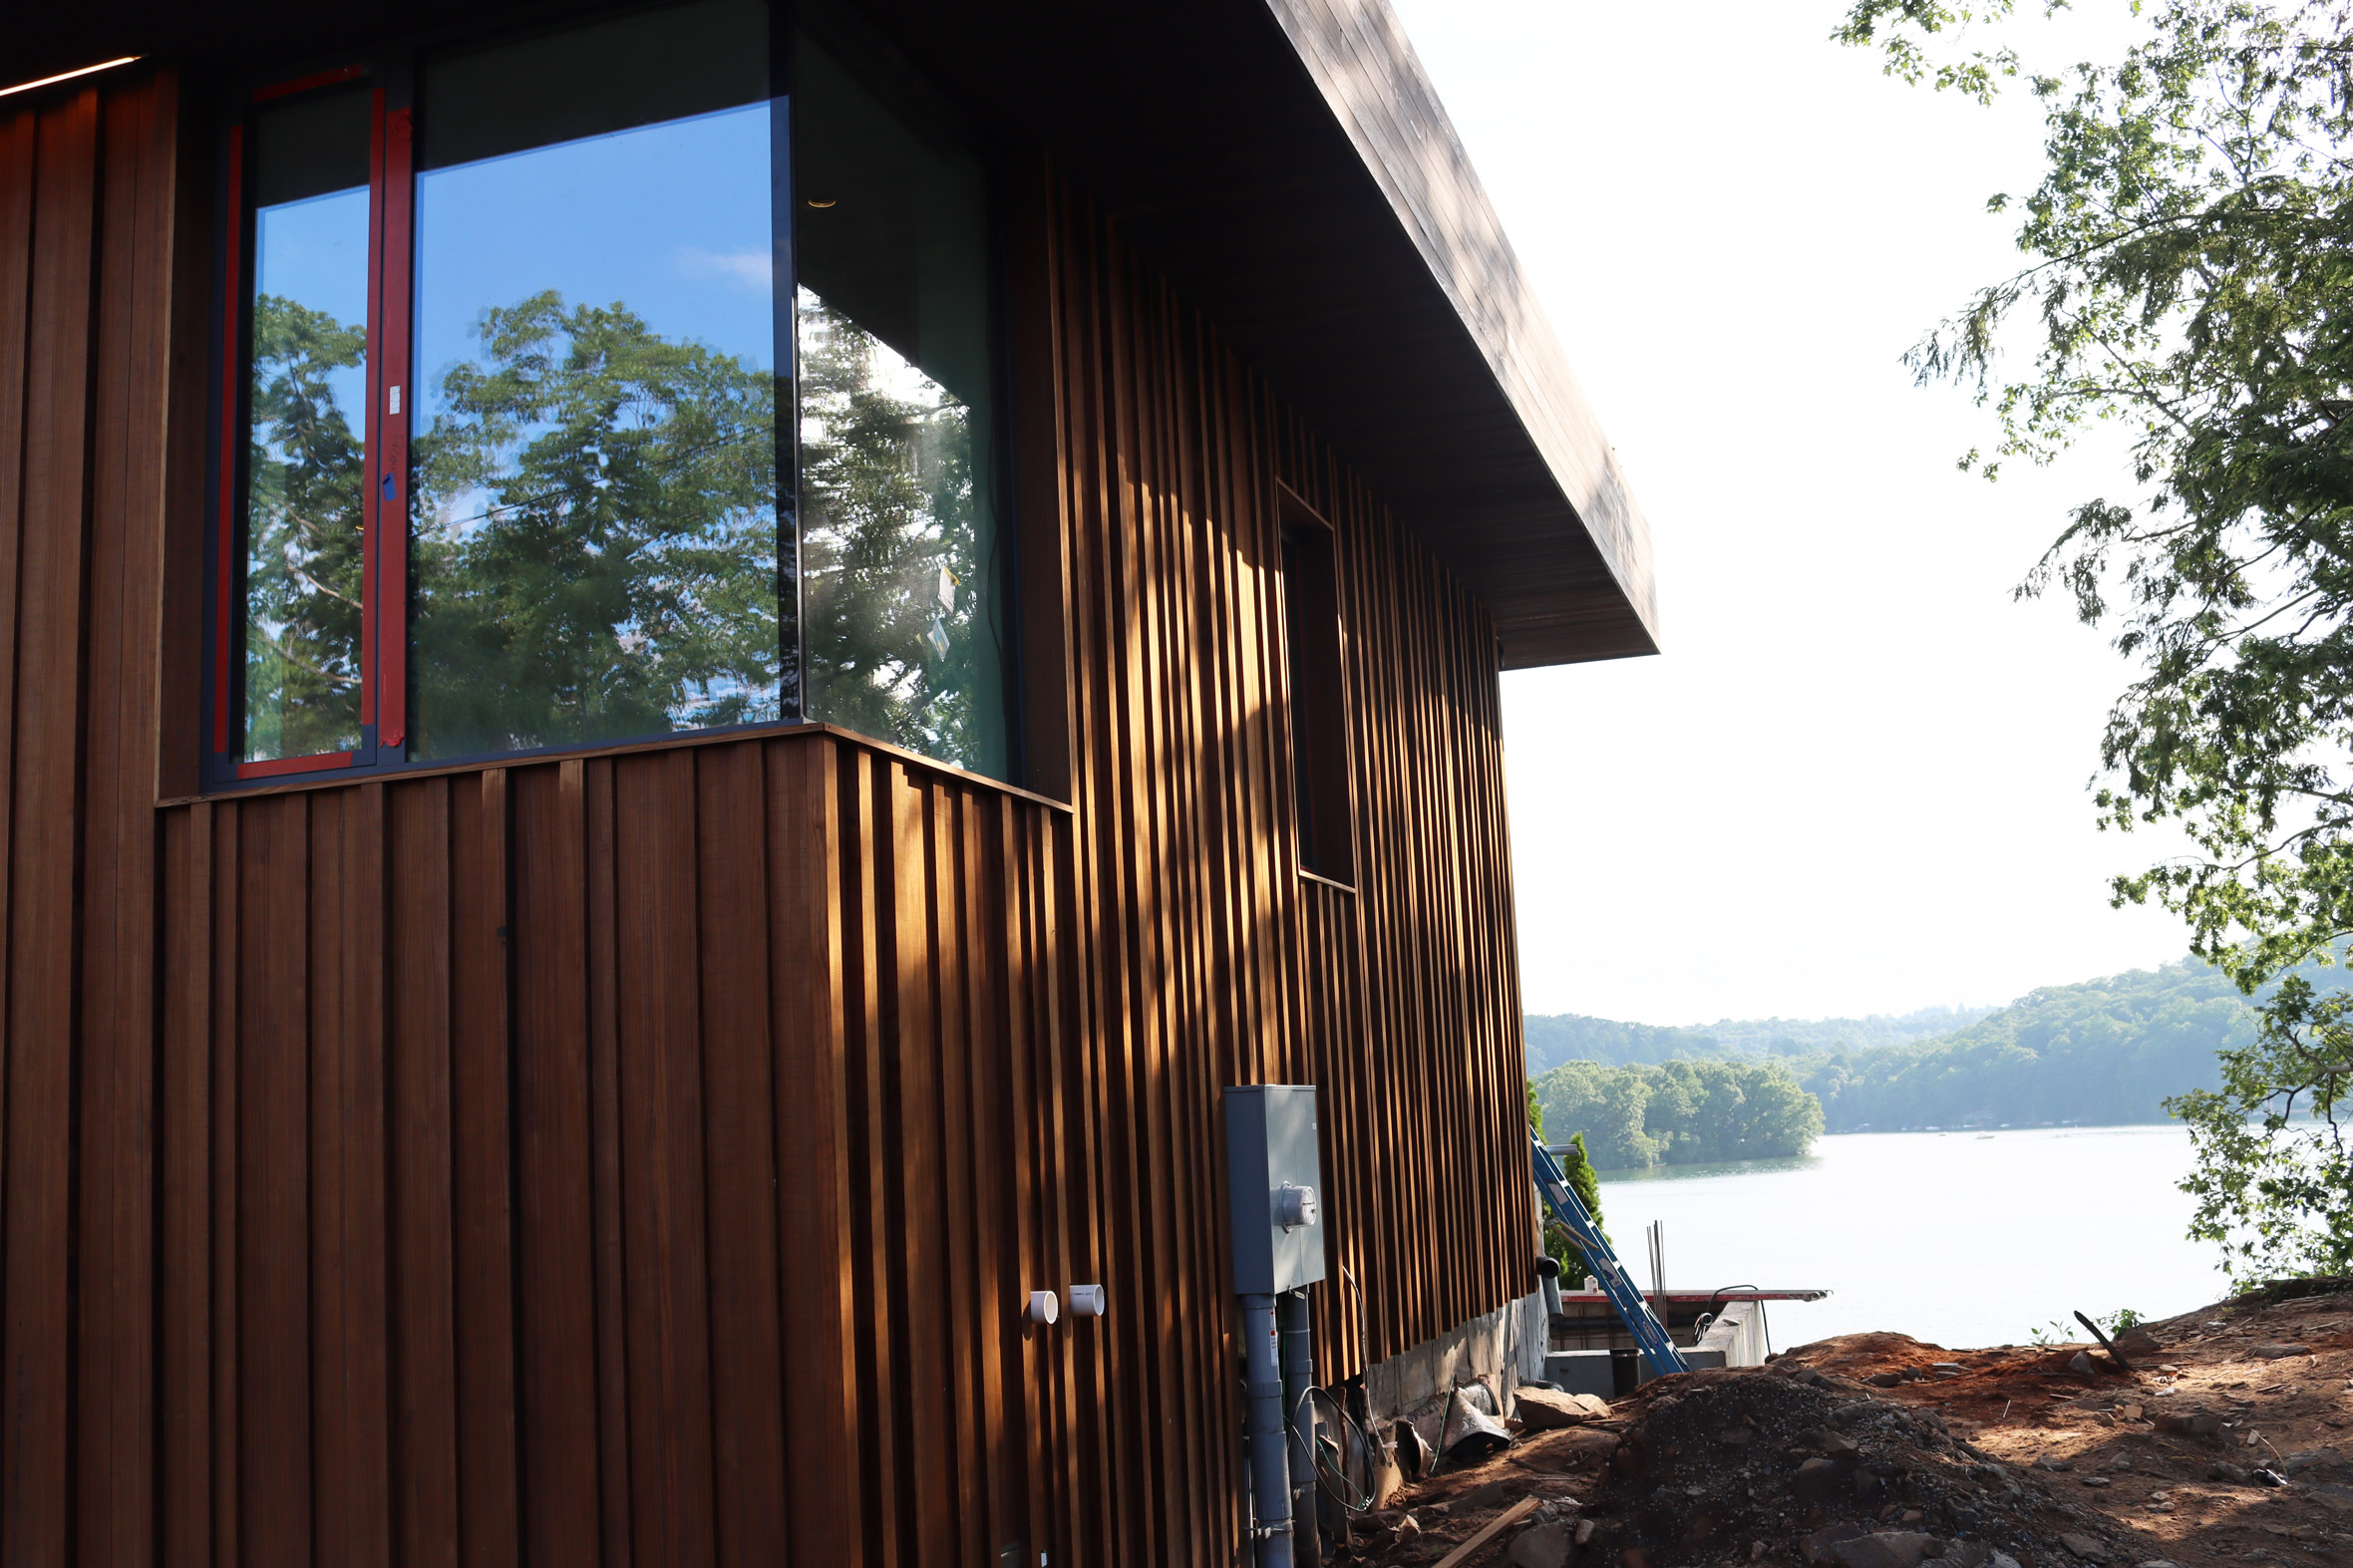 New Fairfield Lake Home featuring TEAK Abodo Vulcan Cladding and PONZU shou sugi ban charred cypress exterior cladding/siding and slats